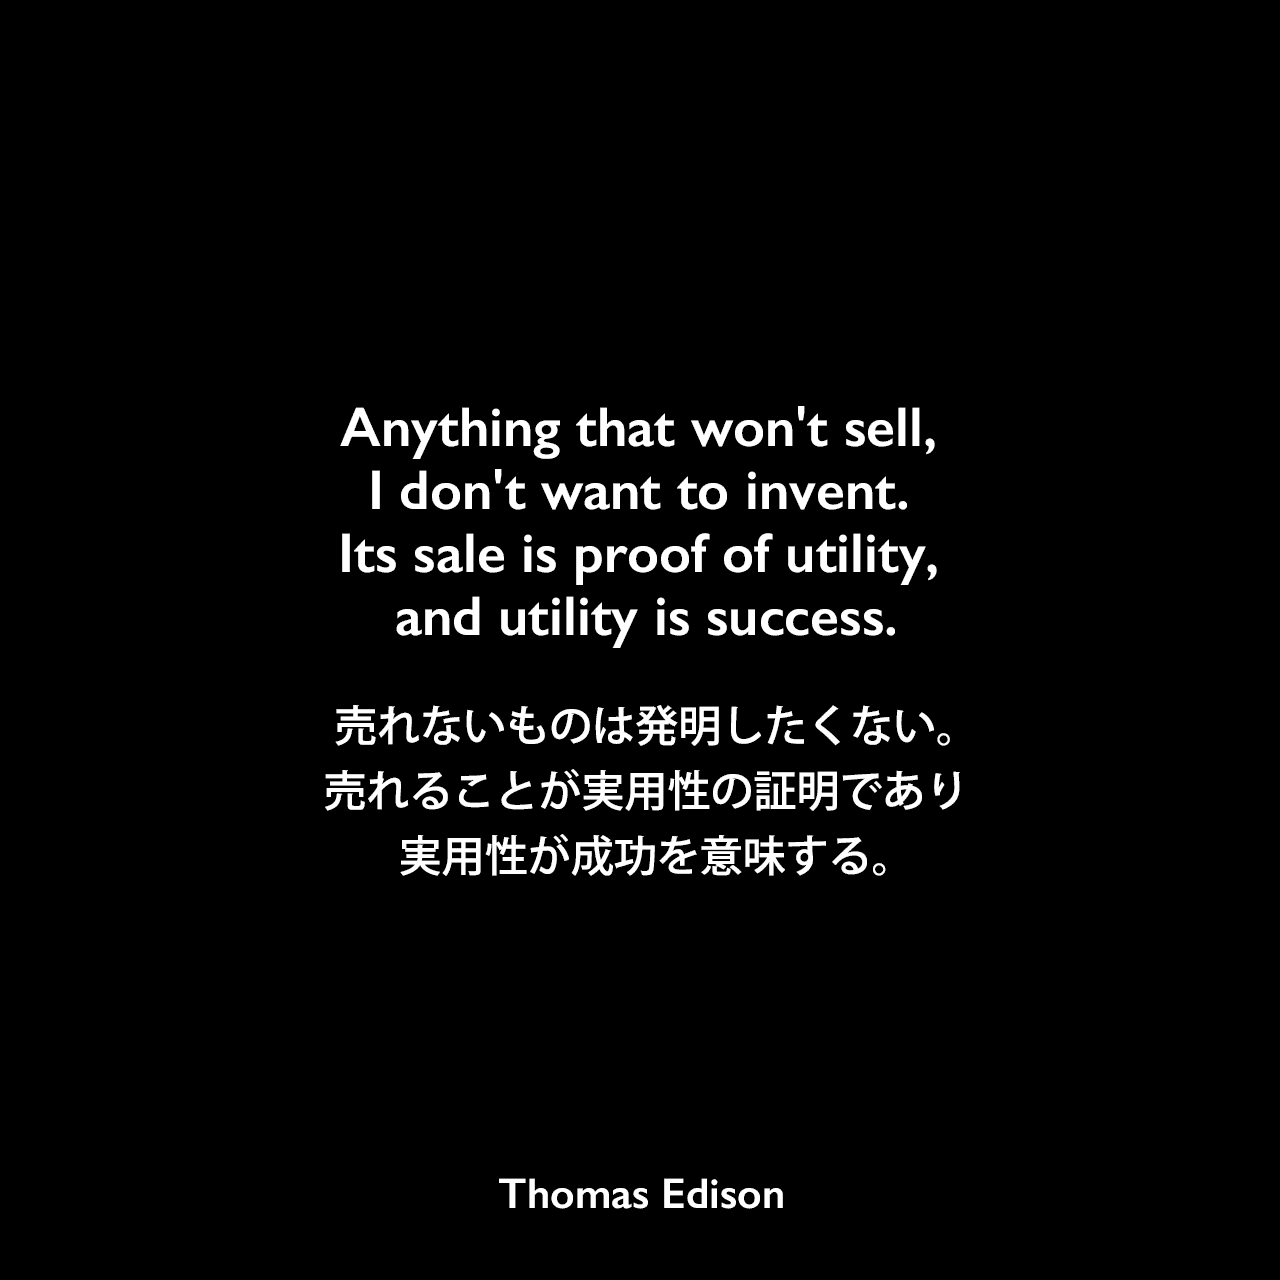 Anything that won't sell, I don't want to invent. Its sale is proof of utility, and utility is success.売れないものは発明したくない。売れることが実用性の証明であり、実用性が成功を意味する。- Edison Innovation Foundationよりエジソンの言葉として引用Thomas Edison